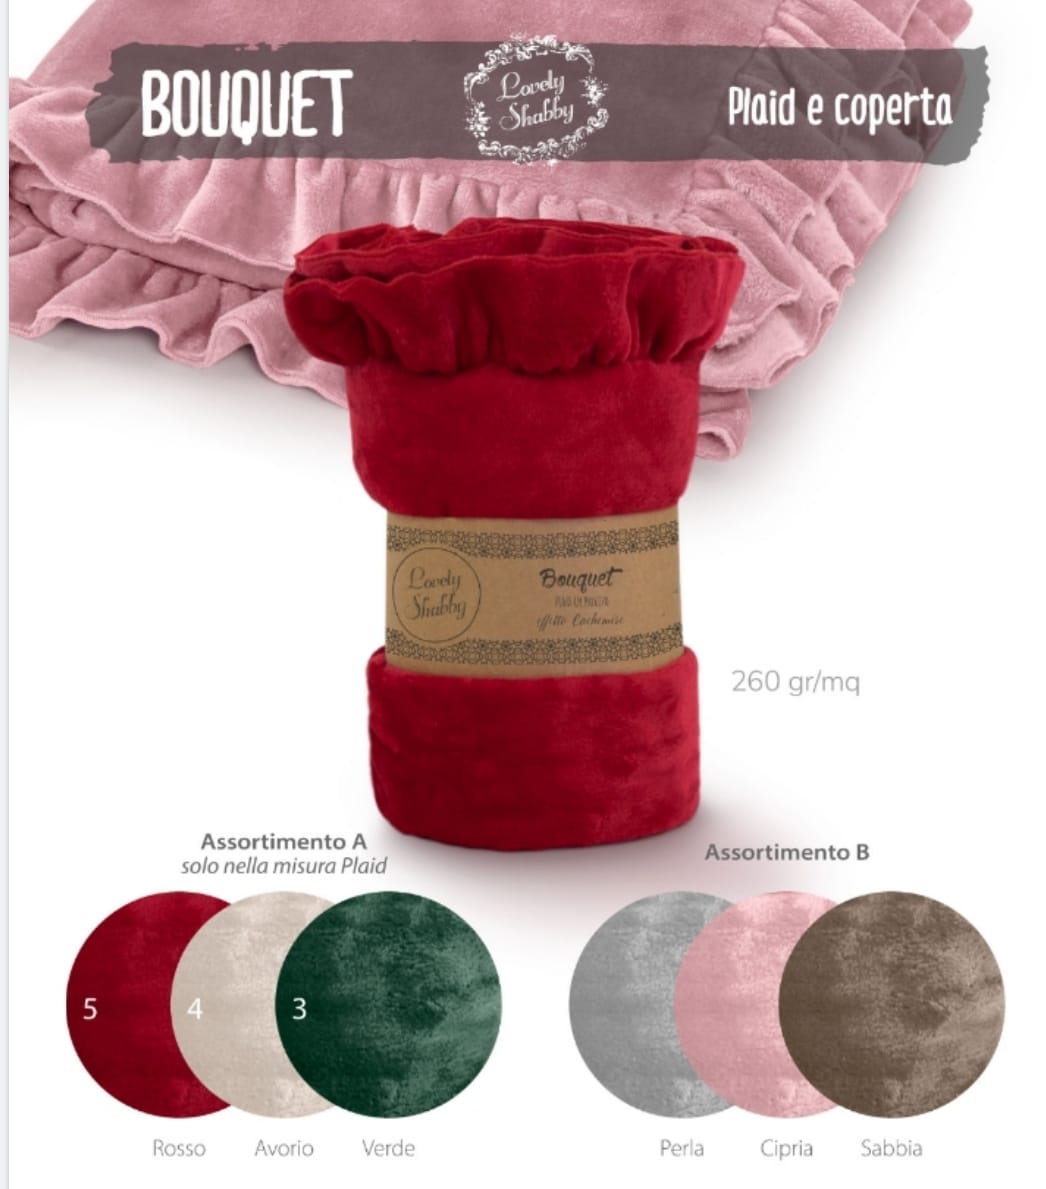 Coperta Plaid matrimoniale con volant Lovely shabby serie Bouquet 210x –  MIRIAM HOME: Shabby Chic & Country Style